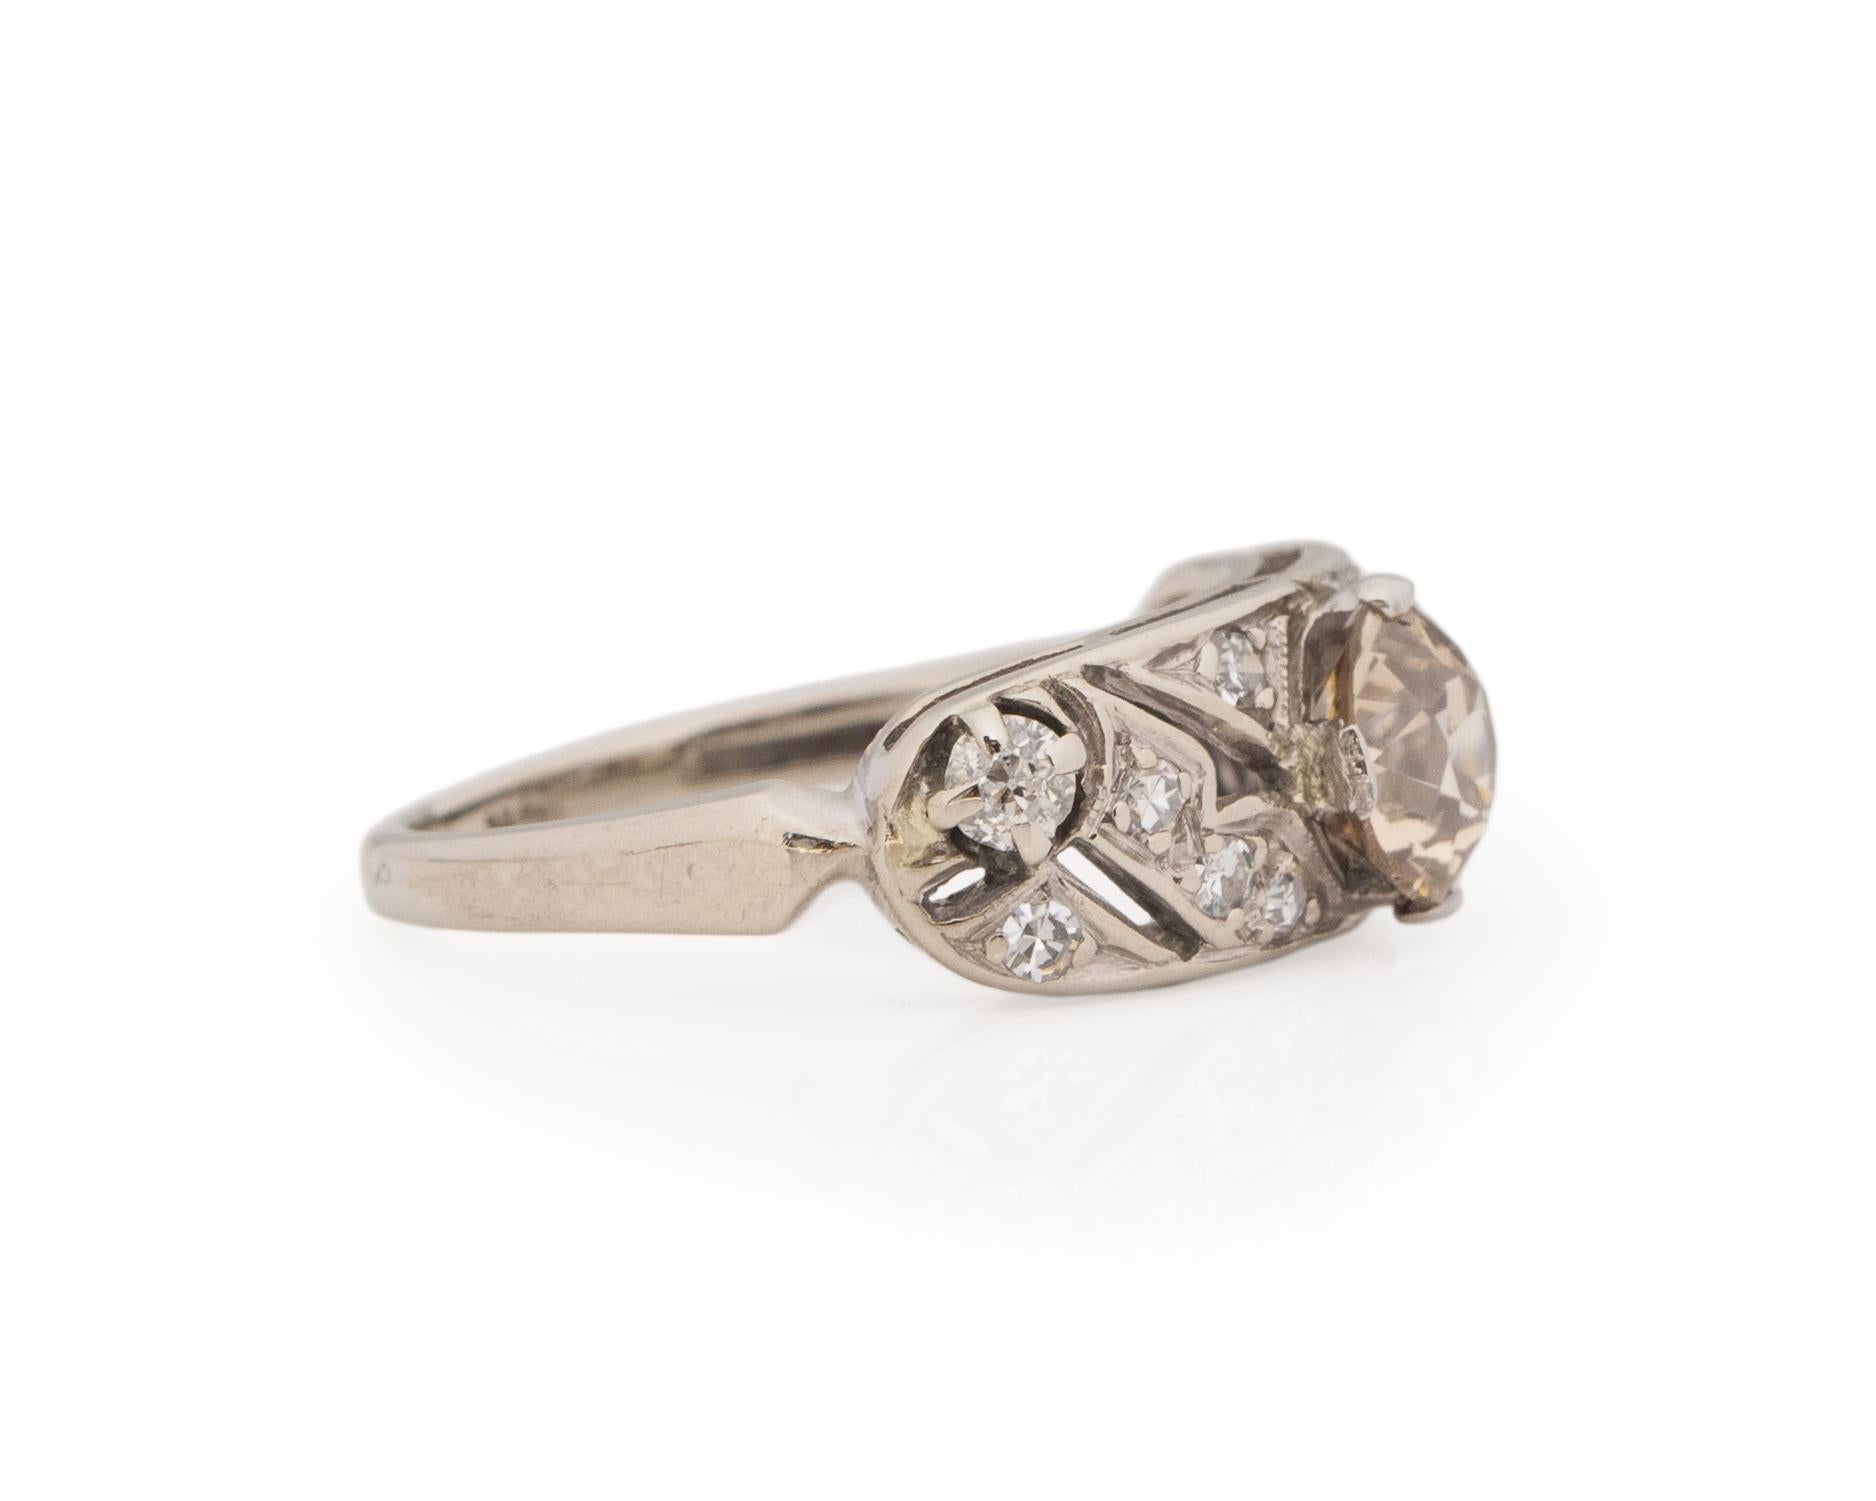 Ring Size: 5.25
Metal Type: Platinum [Hallmarked, and Tested]
Weight: 2.7 grams

Diamond Details:
GIA REPORT #:6224425940
Weight: .91ct, total weight
Cut: Old European brilliant
Color: Light Brown (Cinnamon Color)
Clarity: VS2
Measurements: 6.19mm x